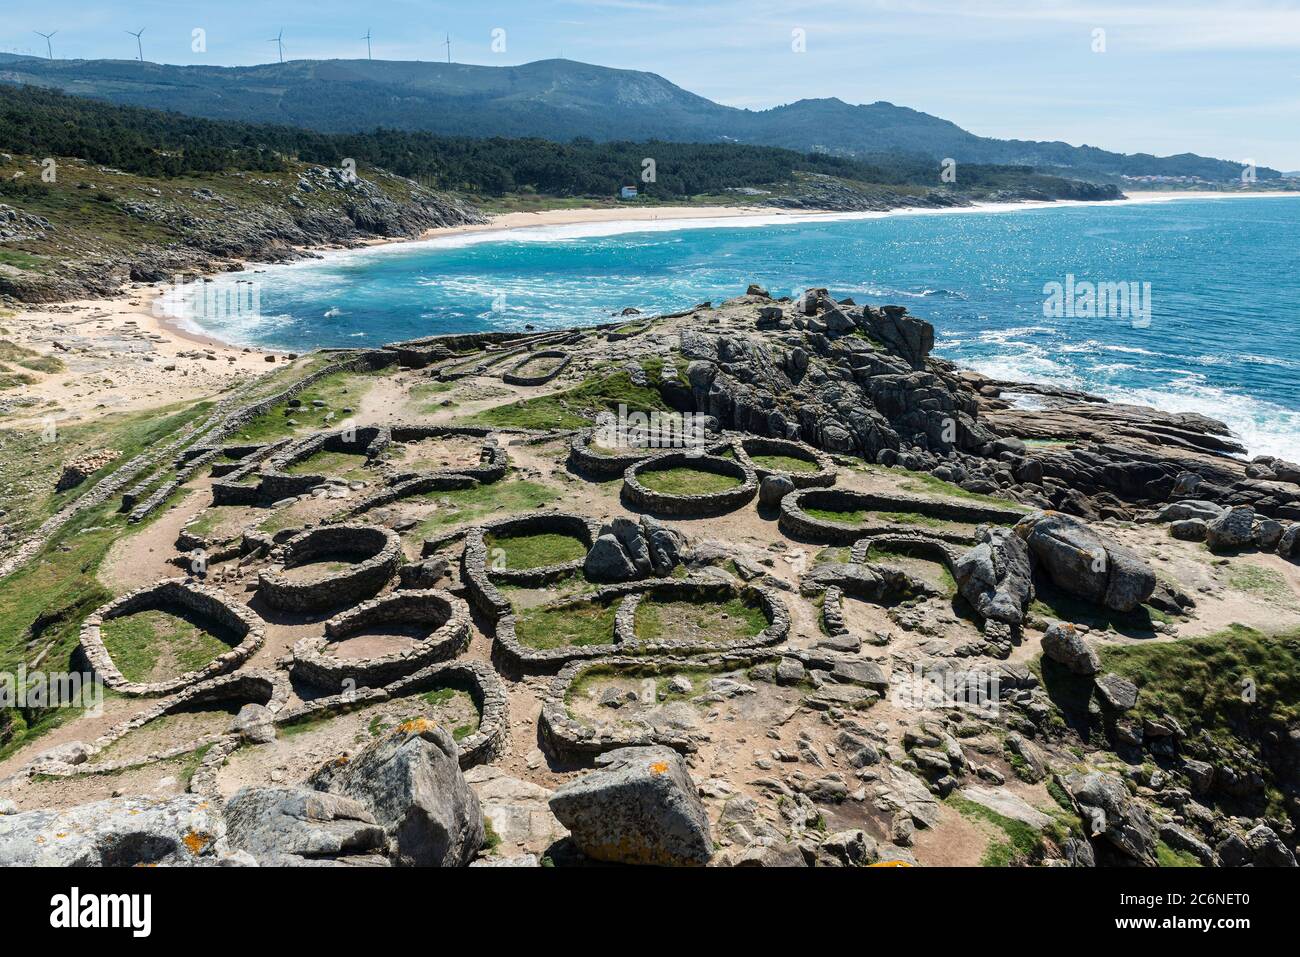 Panorama view of the Castro de Baroña, a fort located in the parish of Baroña in A Coruña, Galicia. Built on a peninsula, it was inhabited from the fi Stock Photo